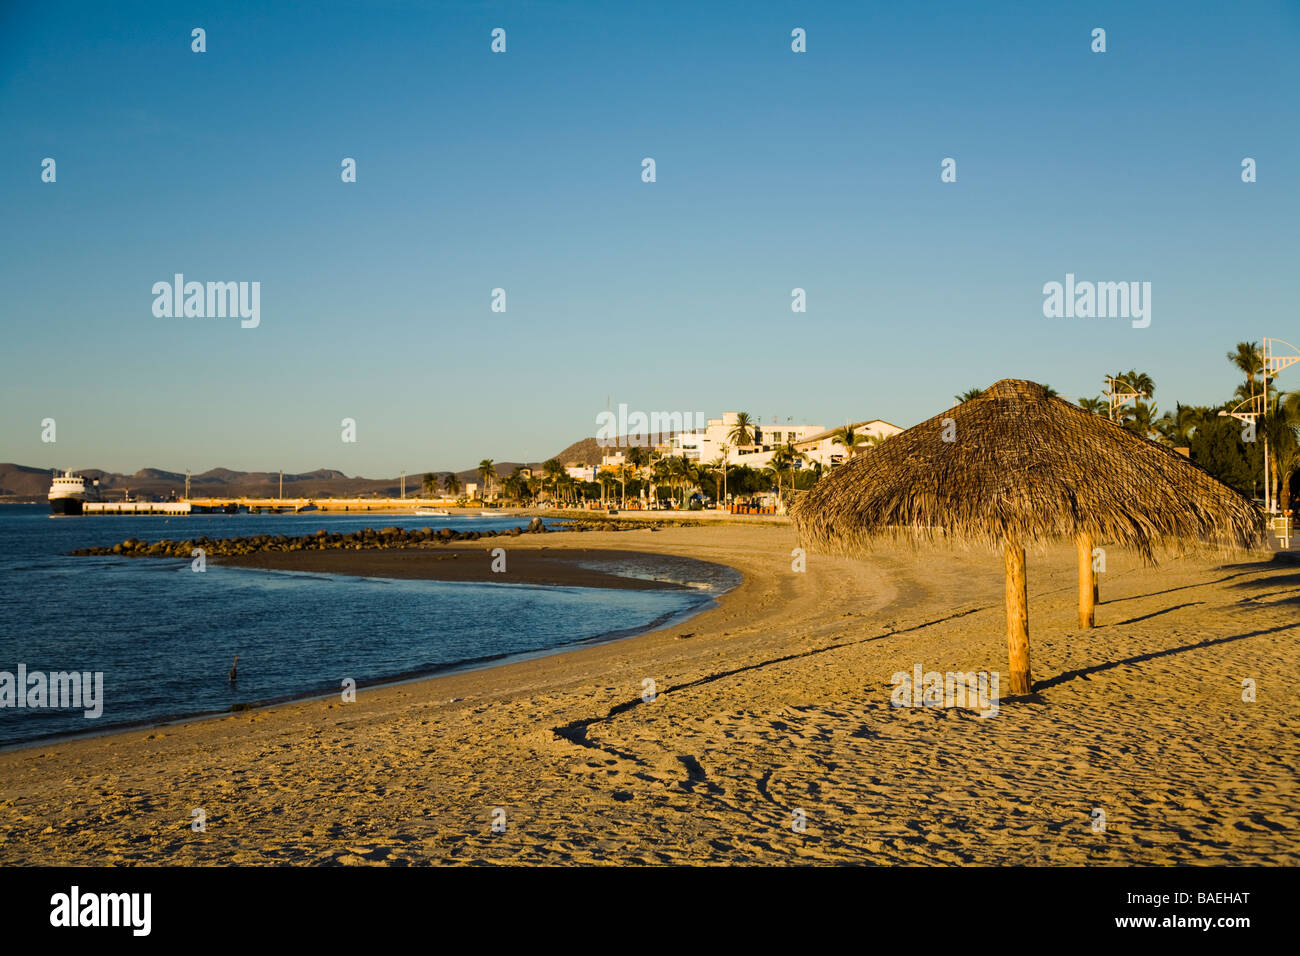 MEXICO La Paz Palapa thatched umbrellas on beach along bay city buildings and mountains in distance Stock Photo